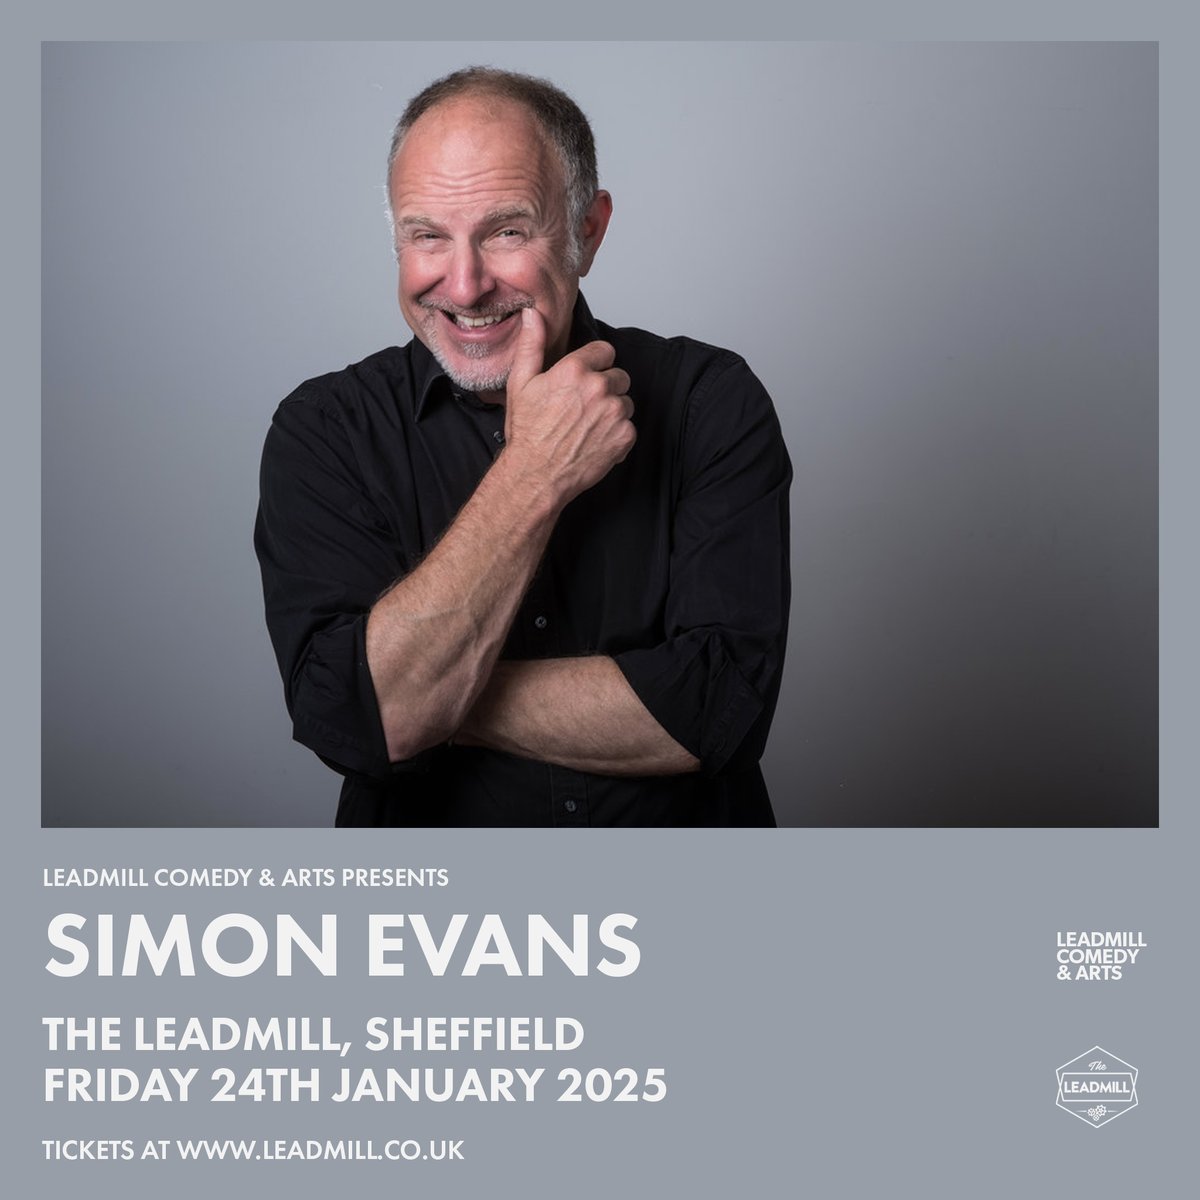 New Show Announcement - @TheSimonEvans 🚨 Star of Live at the Apollo, Michael McIntyre's Roadshow and much much more, Simon Evans brings his 'Have We Met?' tour to The Leadmill in January! Tickets are on sale right now from: leadmill.co.uk/event/simon-ev…